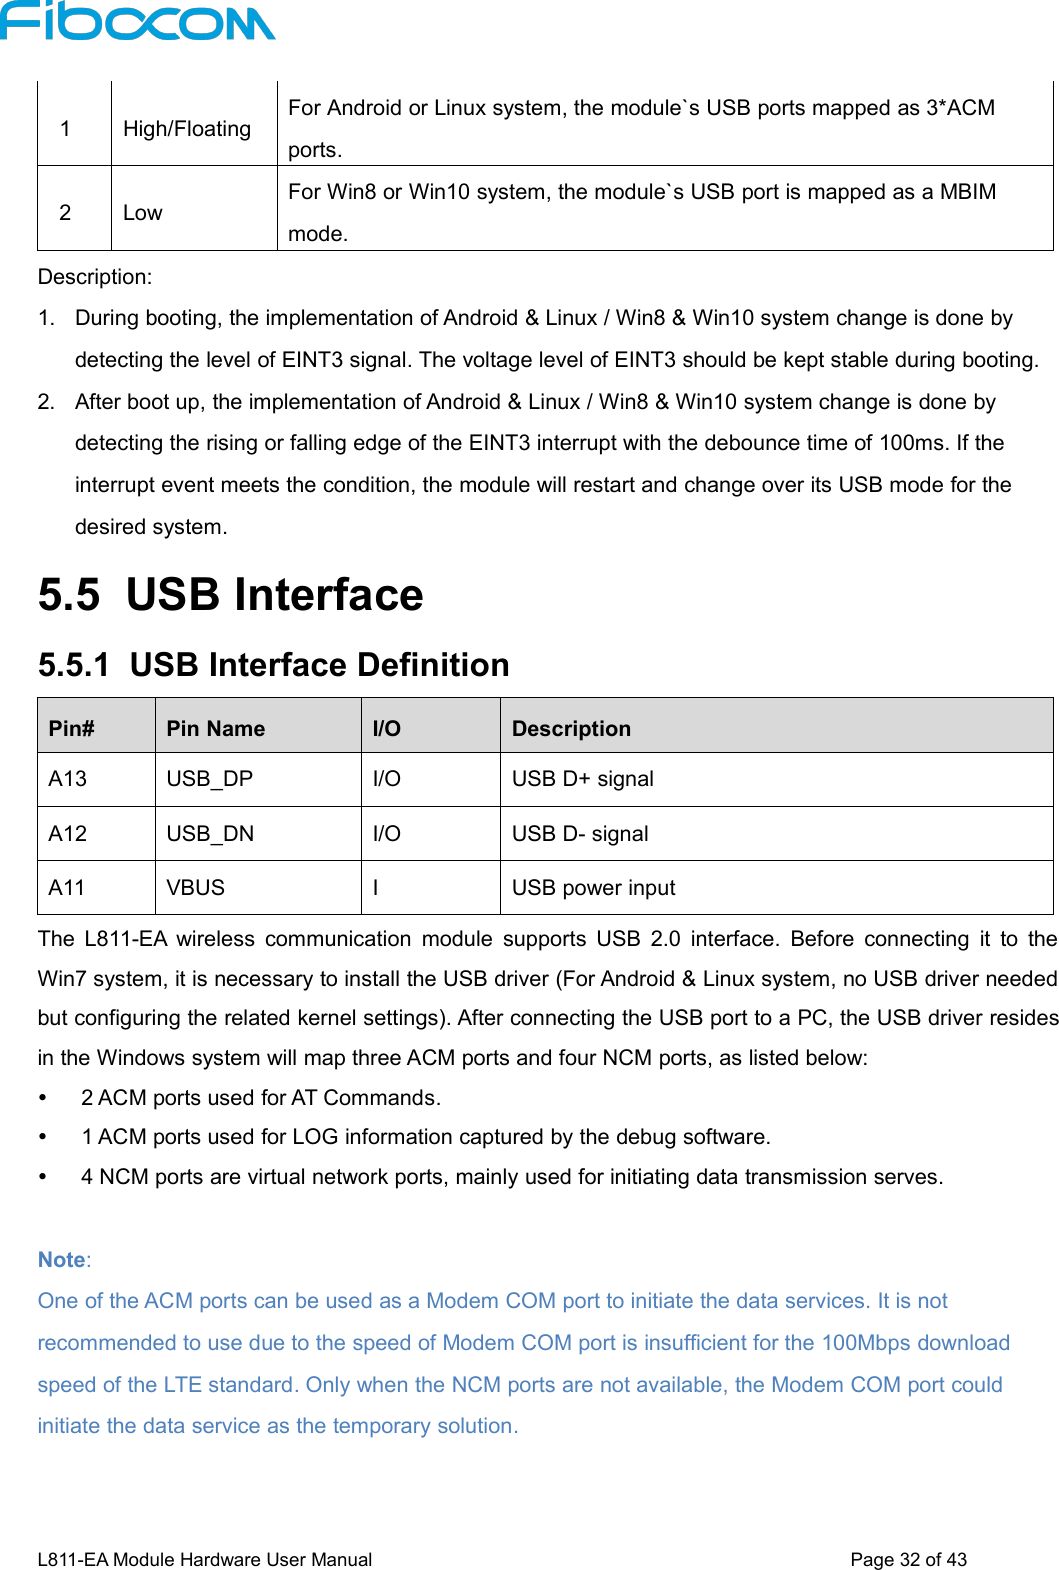 L811-EA Module Hardware User Manual Page32of431High/FloatingFor Android or Linux system, the module`s USB ports mapped as 3*ACMports.2LowFor Win8 or Win10 system, the module`s USB port is mapped as a MBIMmode.Description:1. During booting, the implementation of Android &amp; Linux / Win8 &amp; Win10 system change is done bydetecting the level of EINT3 signal. The voltage level of EINT3 should be kept stable during booting.2. After boot up, the implementation of Android &amp; Linux / Win8 &amp; Win10 system change is done bydetecting the rising or falling edge of the EINT3 interrupt with the debounce time of 100ms. If theinterrupt event meets the condition, the module will restart and change over its USB mode for thedesired system.5.5 USB Interface5.5.1 USB Interface DefinitionPin#Pin NameI/ODescriptionA13USB_DPI/OUSB D+ signalA12USB_DNI/OUSB D- signalA11VBUSIUSB power inputThe L811-EA wireless communication module supports USB 2.0 interface. Before connecting it to theWin7 system, it is necessary to install the USB driver (For Android &amp; Linux system, no USB driver neededbut configuring the related kernel settings). After connecting the USB port to a PC, the USB driver residesin the Windows system will map three ACM ports and four NCM ports, as listed below:2 ACM ports used for AT Commands.1 ACM ports used for LOG information captured by the debug software.4 NCM ports are virtual network ports, mainly used for initiating data transmission serves.Note:One of the ACM ports can be used as a Modem COM port to initiate the data services. It is notrecommended to use due to the speed of Modem COM port is insufficient for the 100Mbps downloadspeed of the LTE standard. Only when the NCM ports are not available, the Modem COM port couldinitiate the data service as the temporary solution.